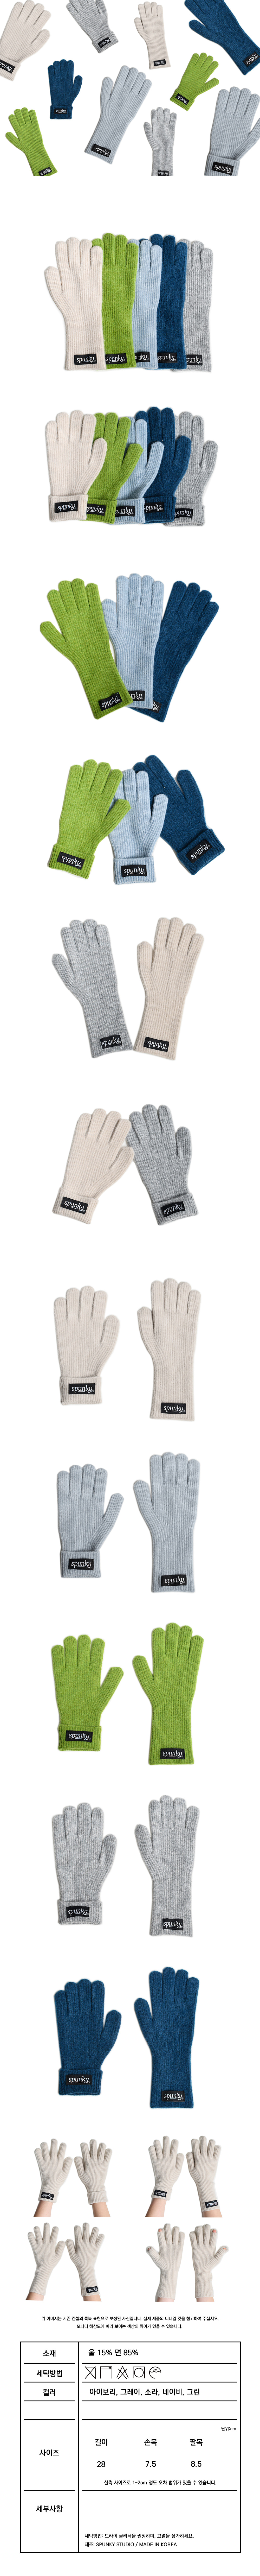 Texture Wool 15% Gloves (5 COLOR)